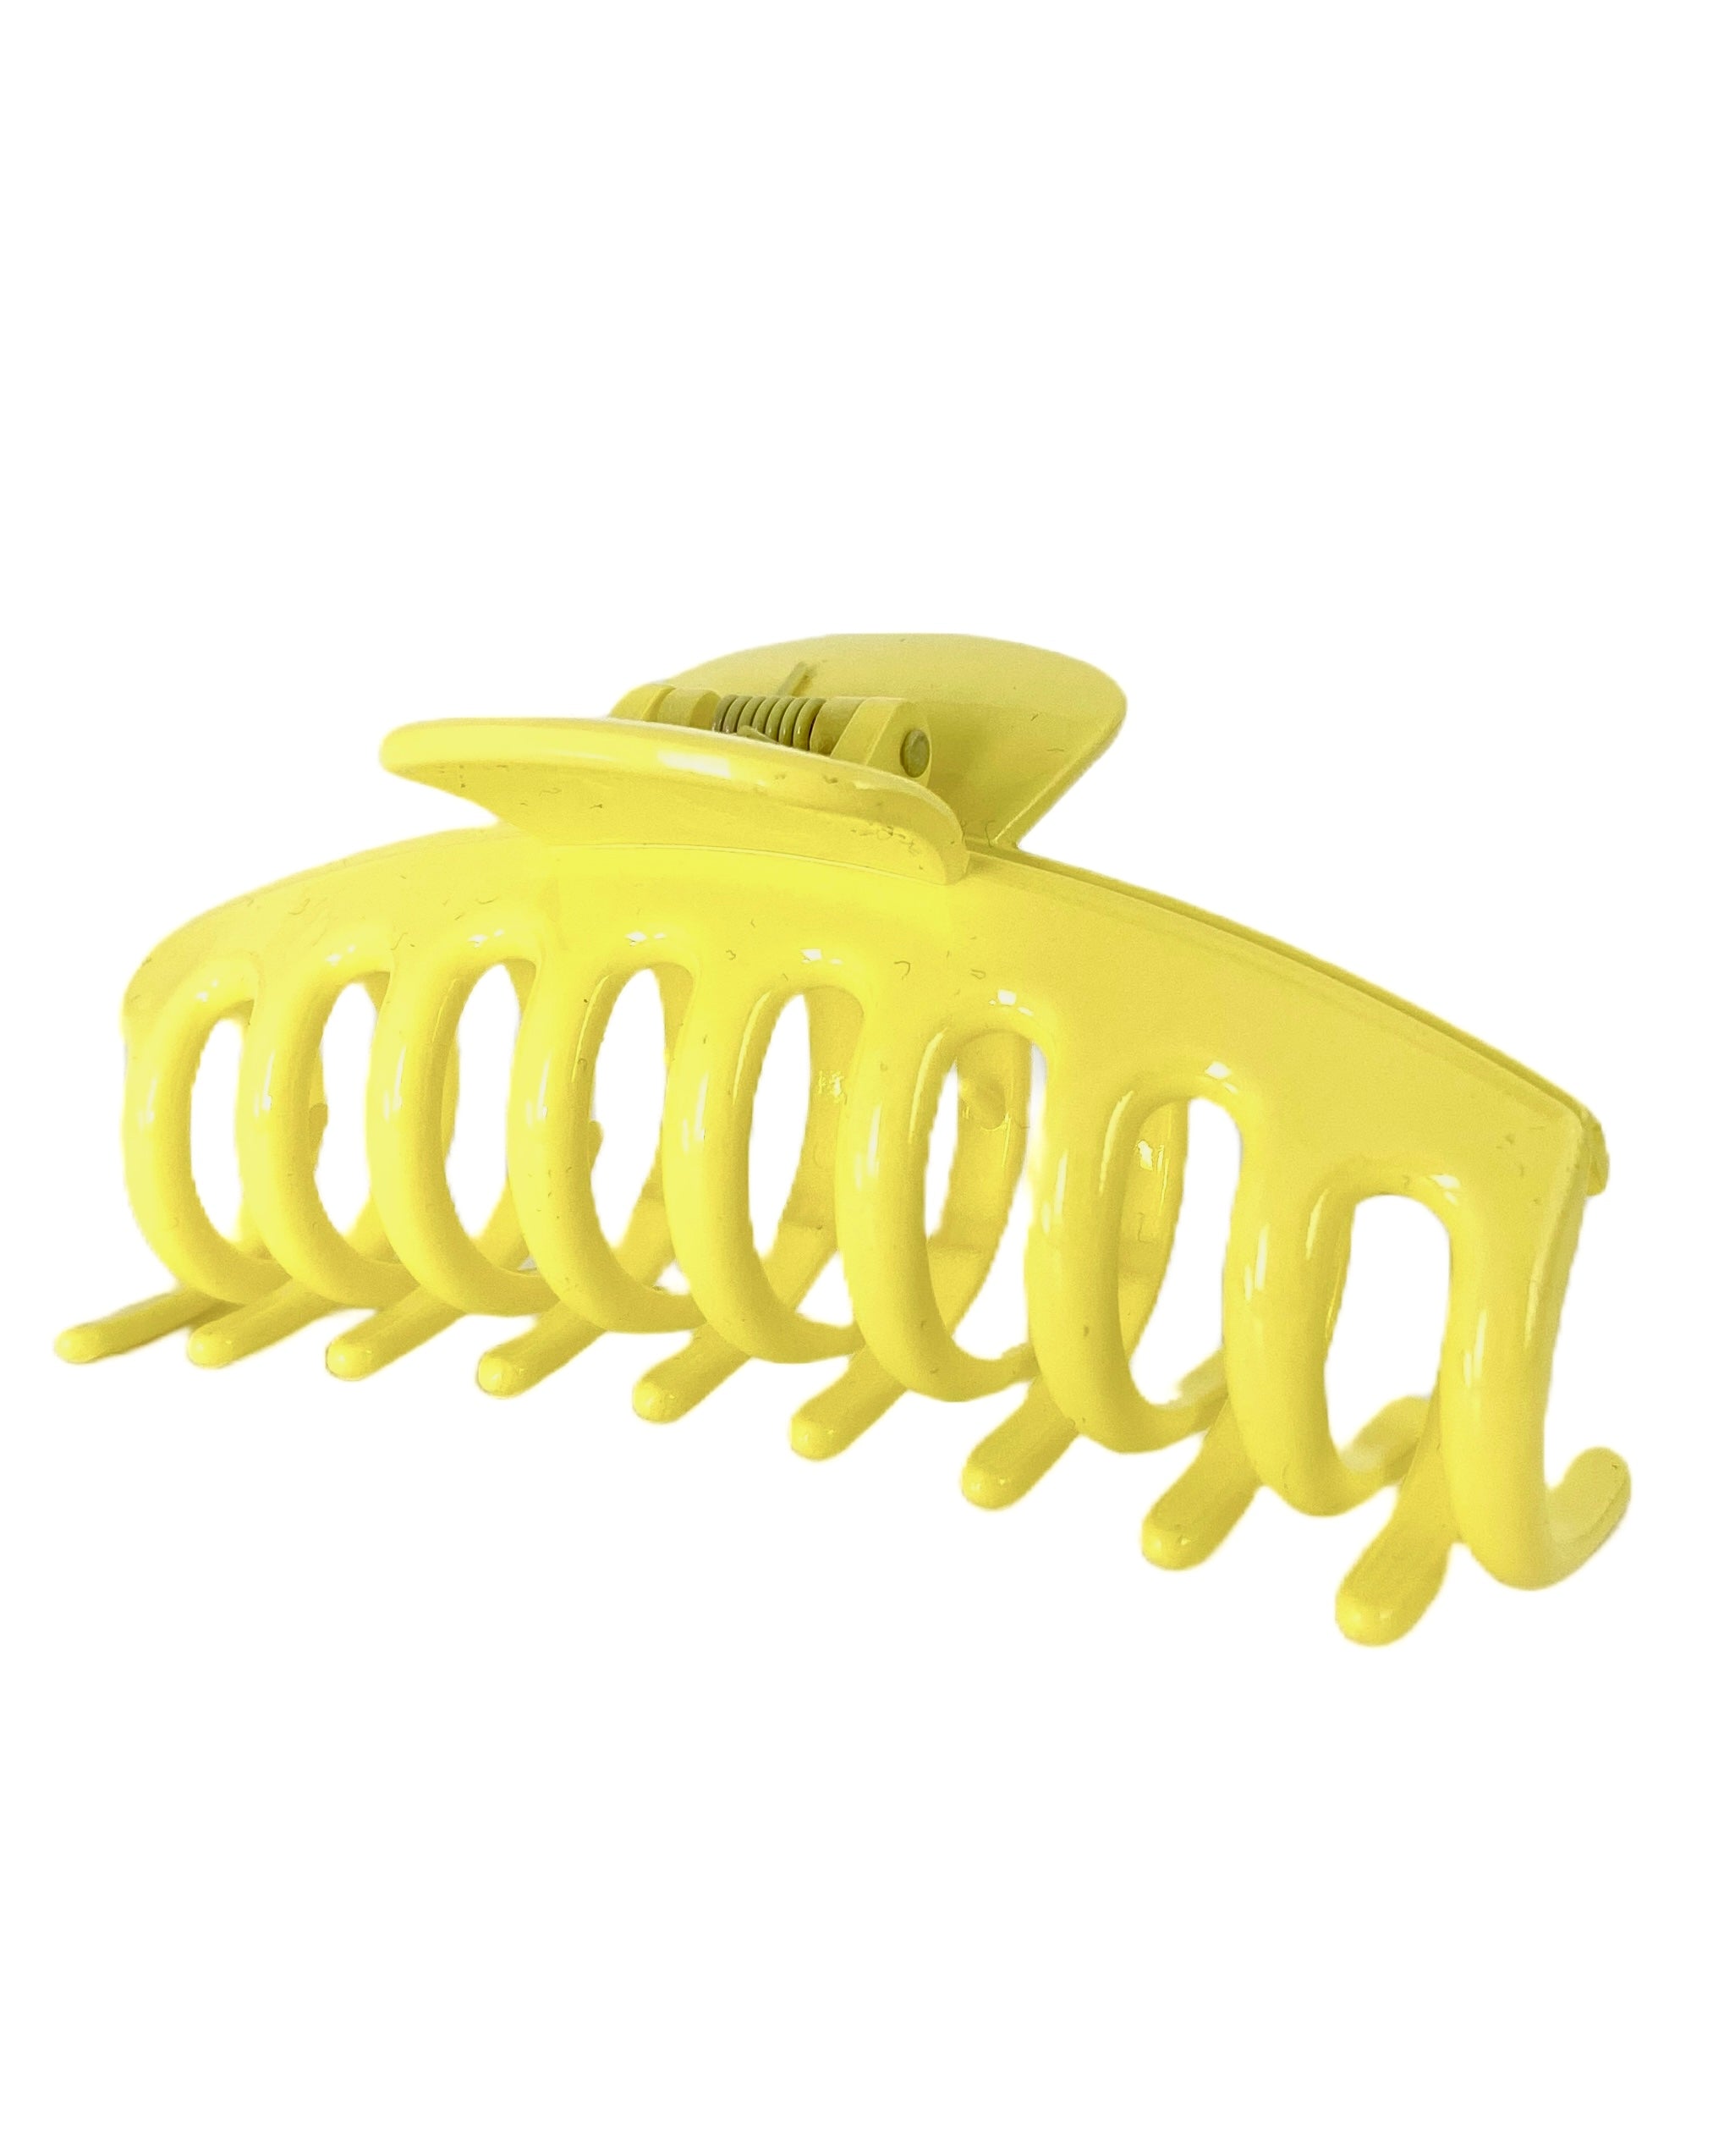 "MARIE-CLAIRE" HAARCLIP YELLOW SHINY (11 CM)